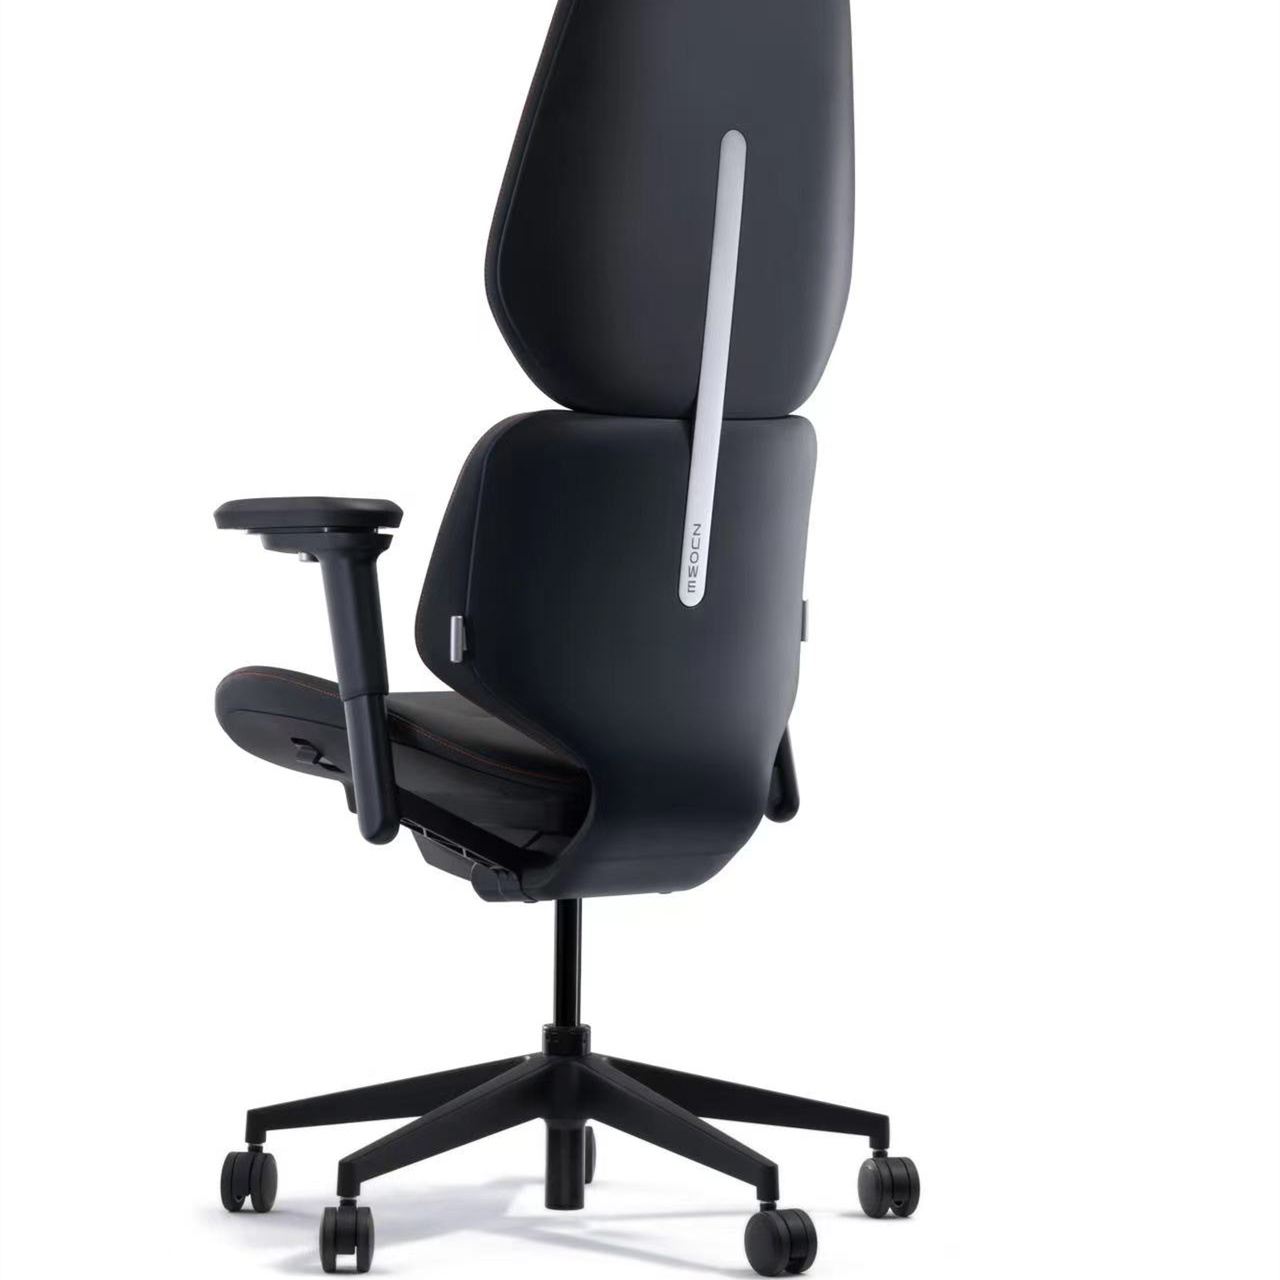 ZUOWE Office Chair Ergonomic Business Comfortable Sedentary Managerial Chairs 